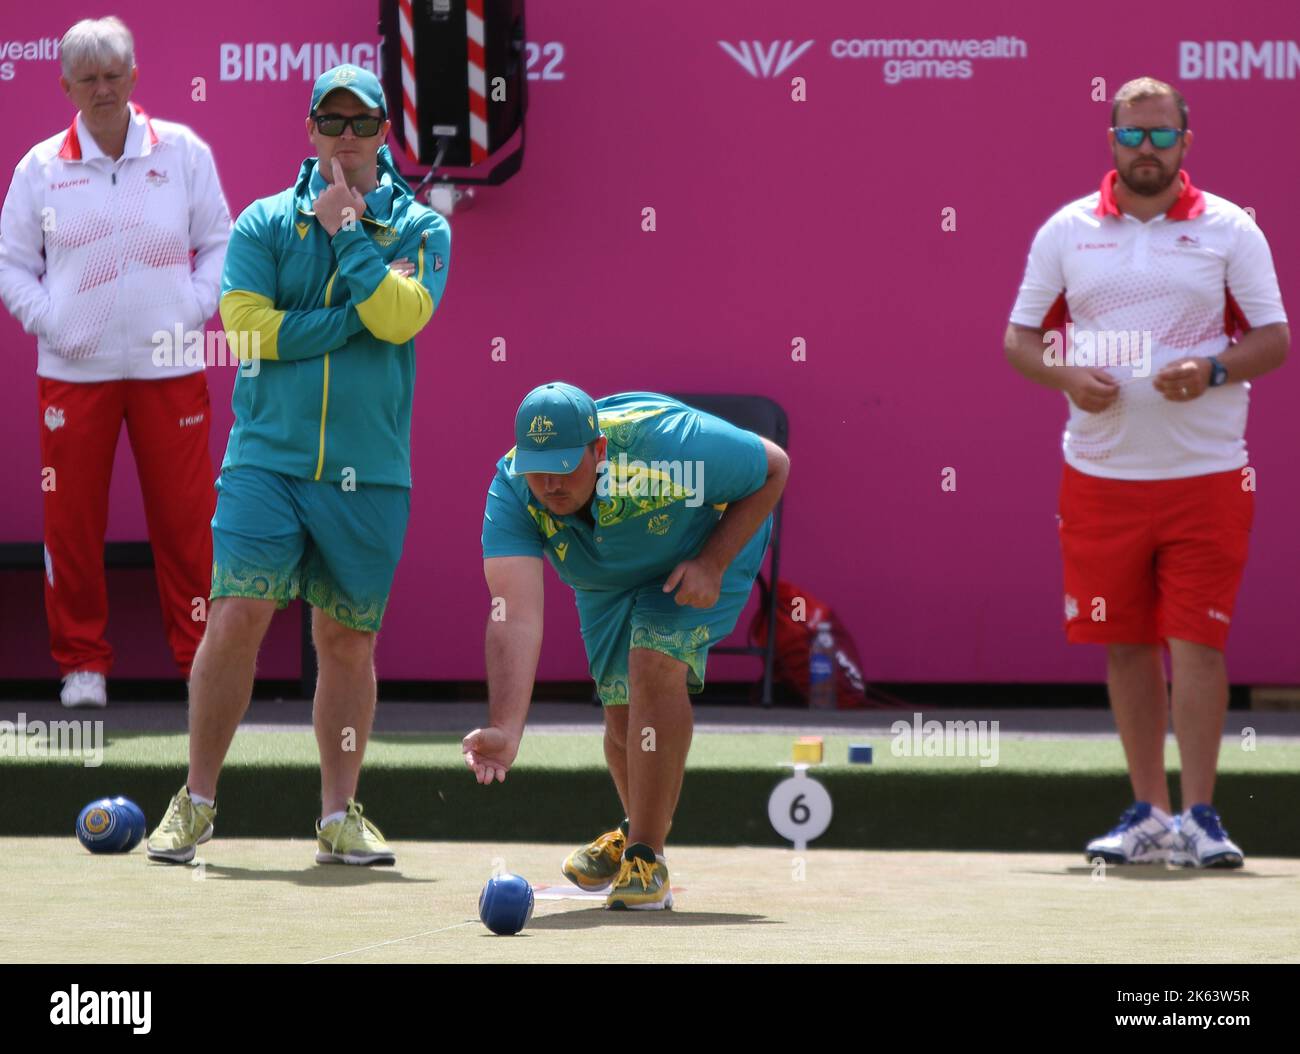 Jake FEHLBERG (Skip) of Australia (pictured) v England in the Para Mixed Pairs B2/B3 - Bronze Medal Match in the lawn bowls at the 2022 Commonwealth games at Victoria Park, Royal Leamington Spa. Stock Photo